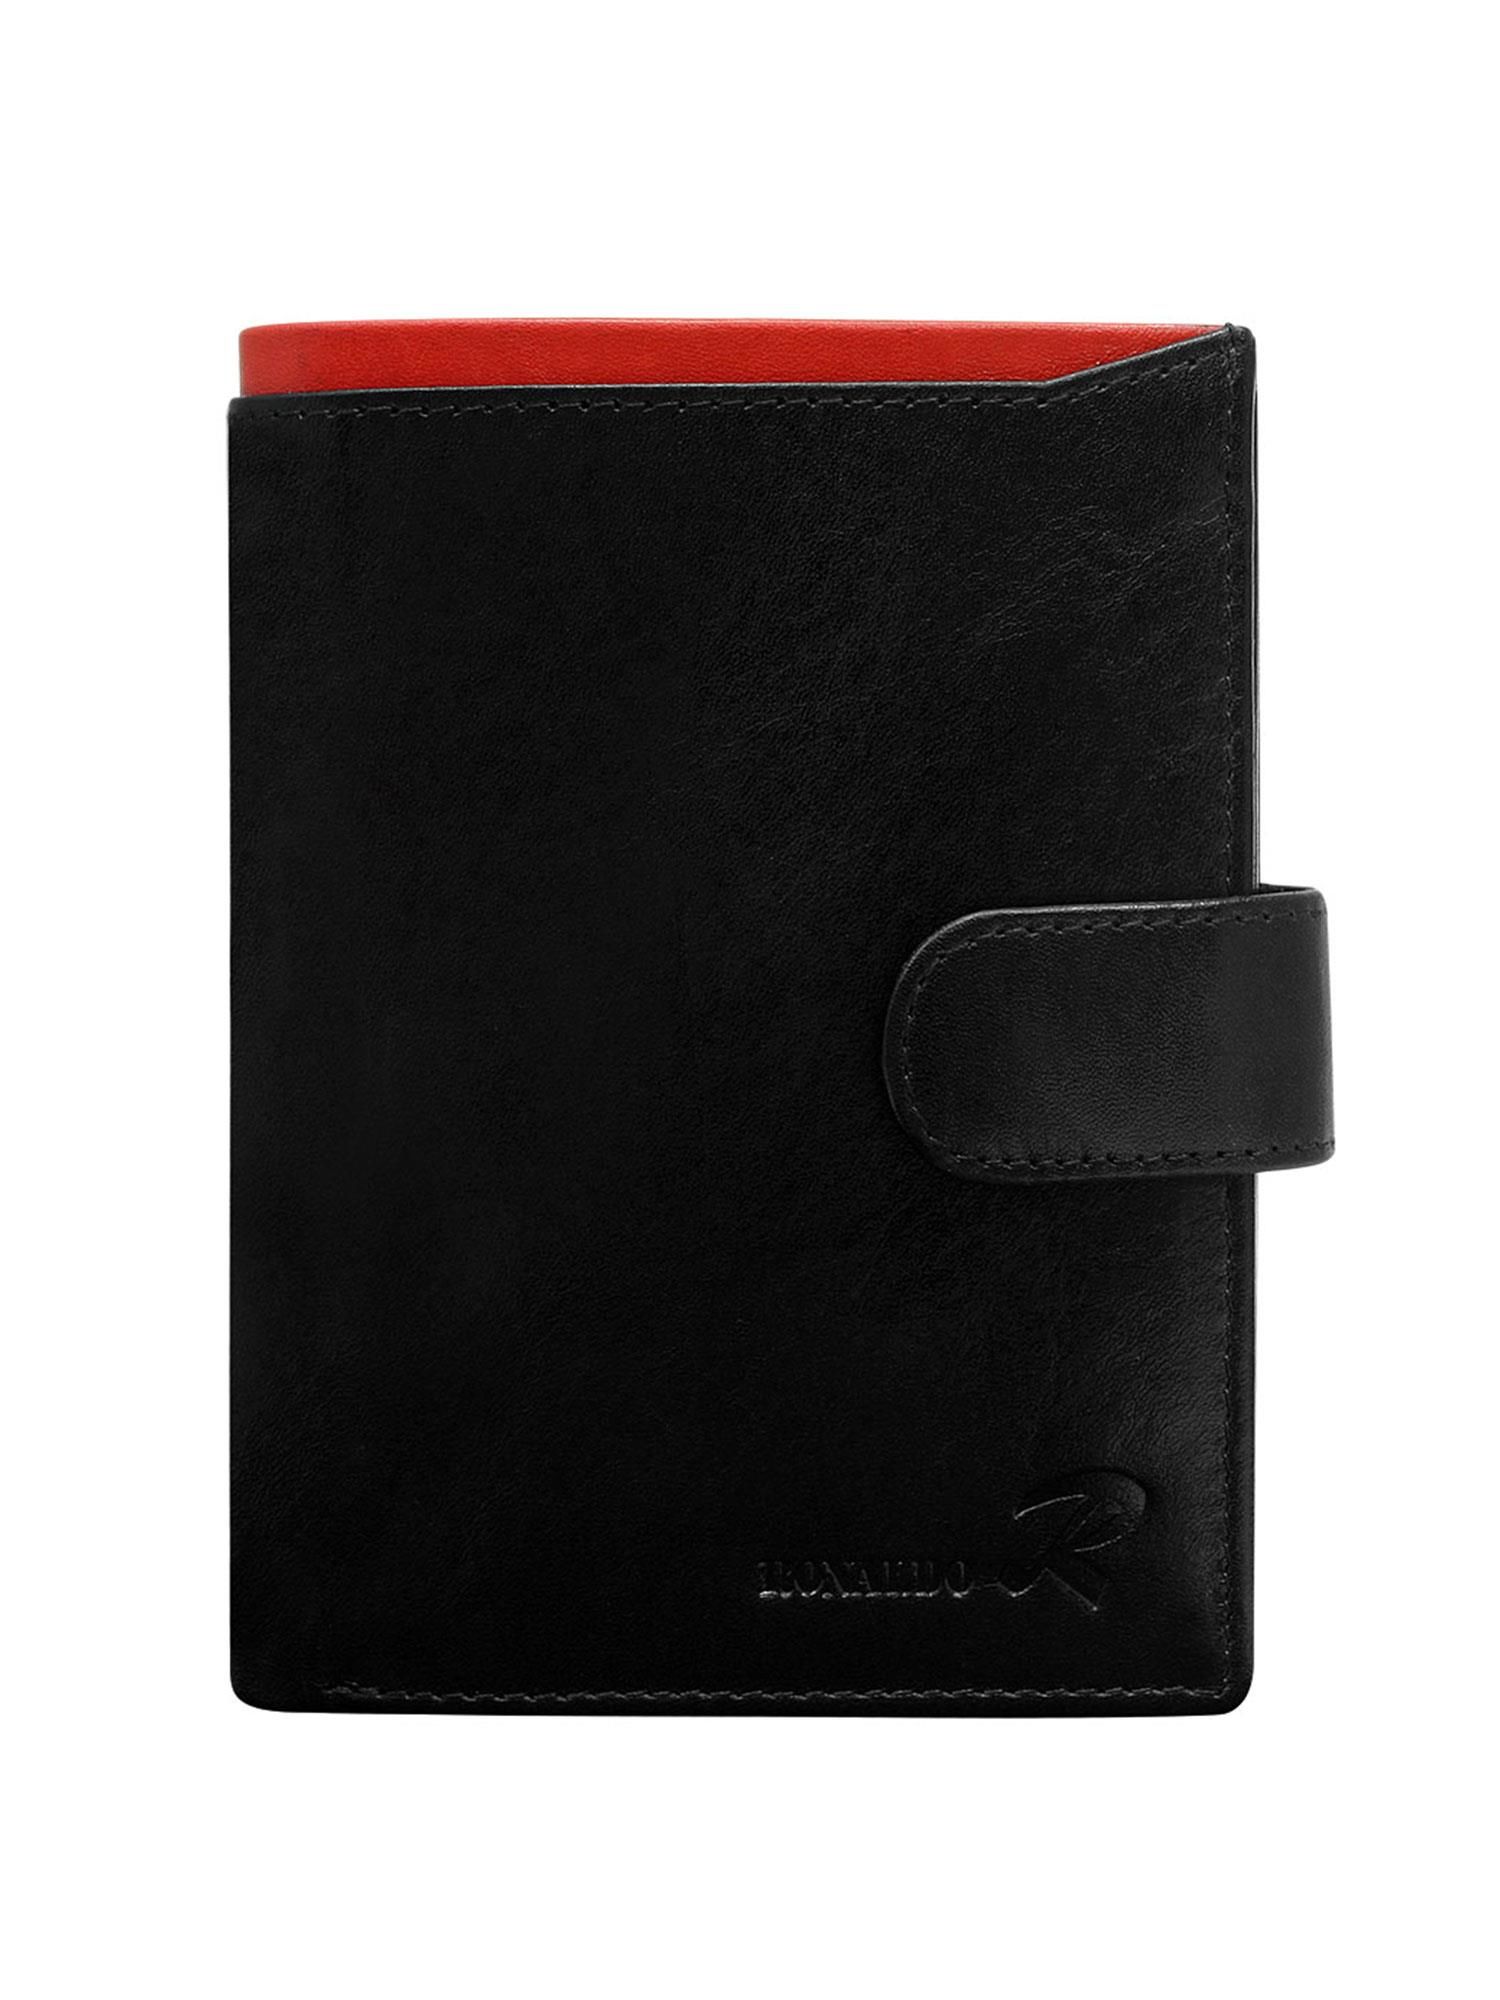 Men's leather wallet with red inset